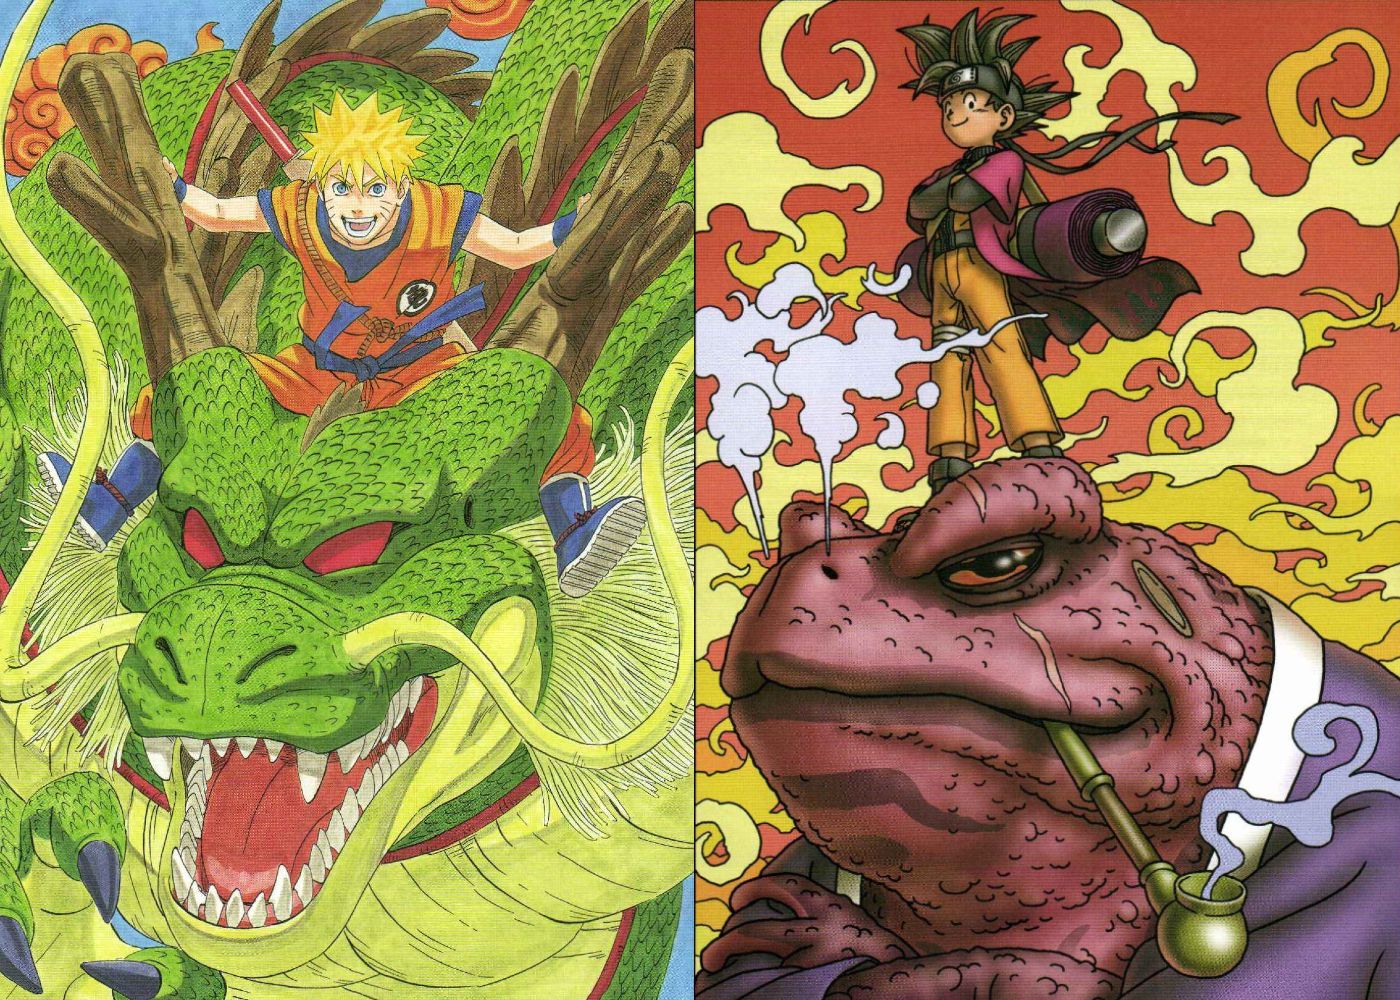 Naruto and Goku Trade Places in Epic Art From Series’ Creators